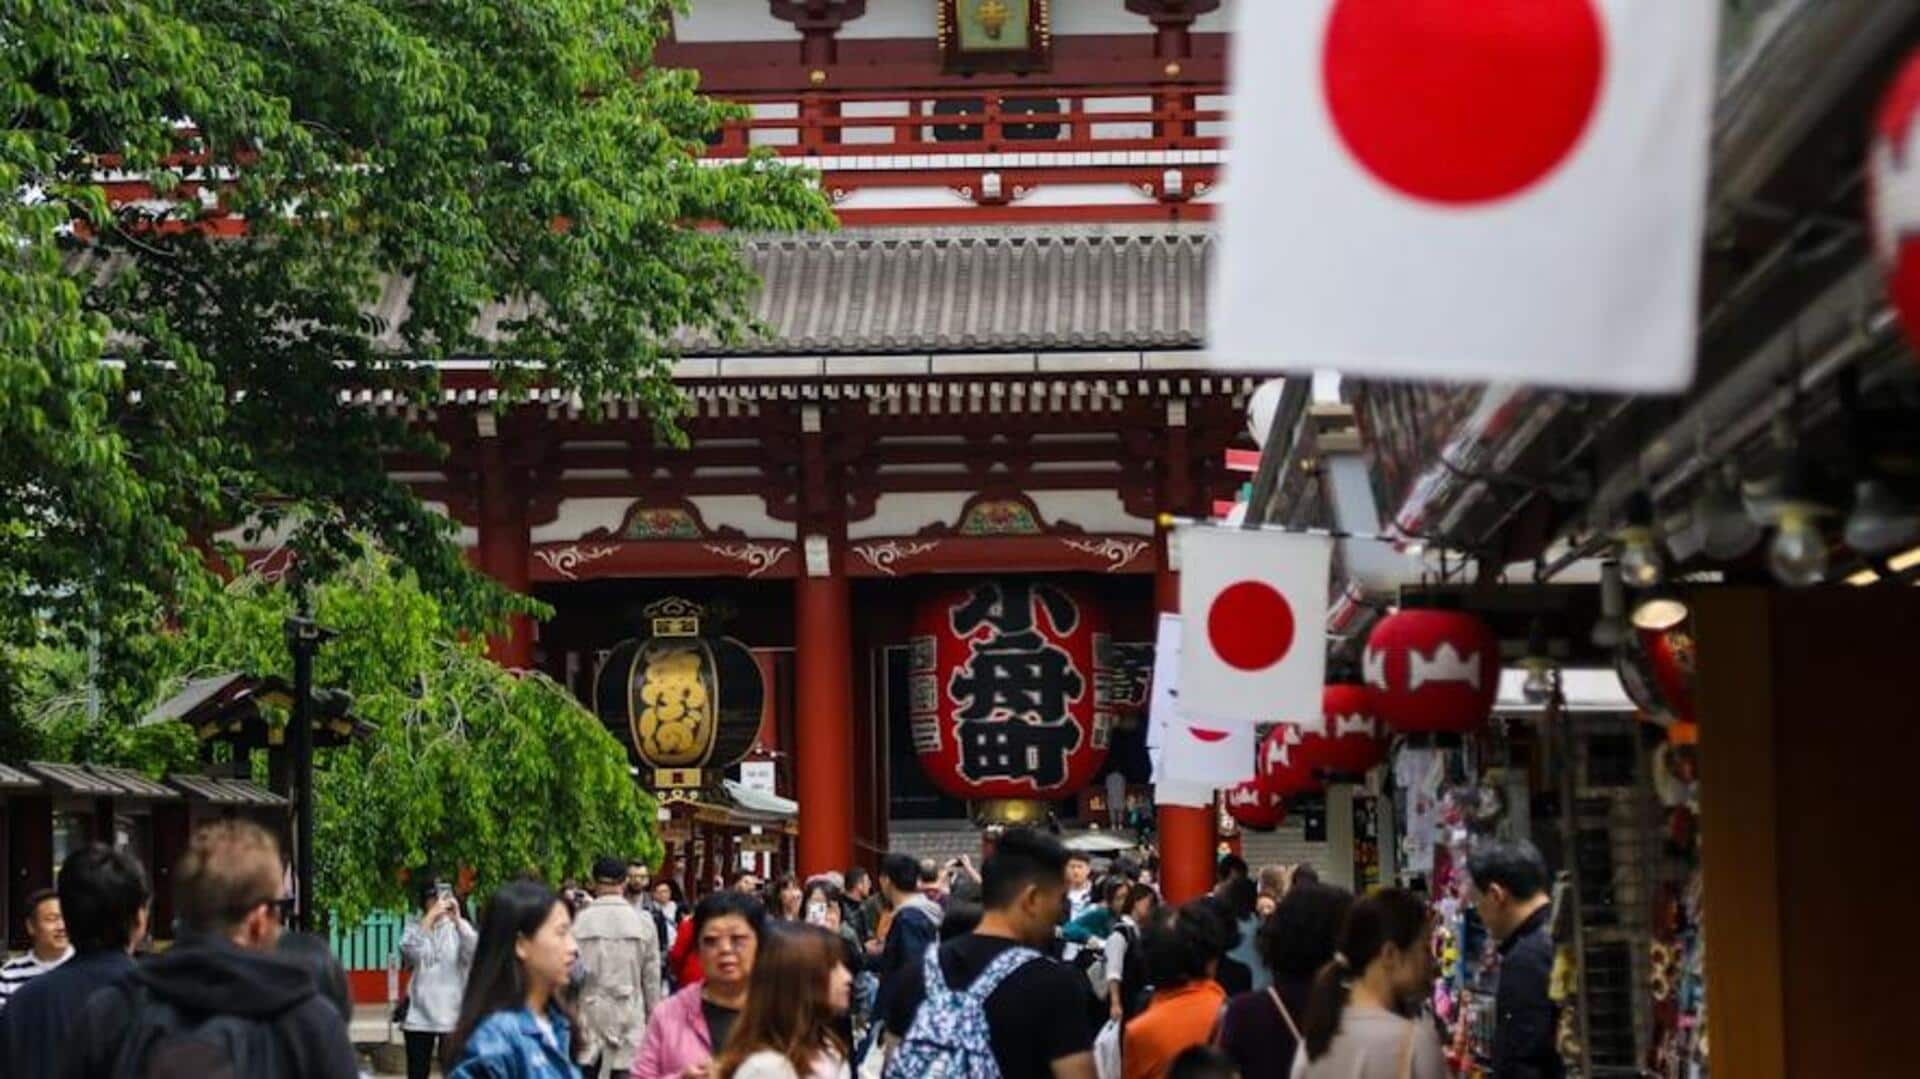 Japan: World's last negative interest economic policy may end soon